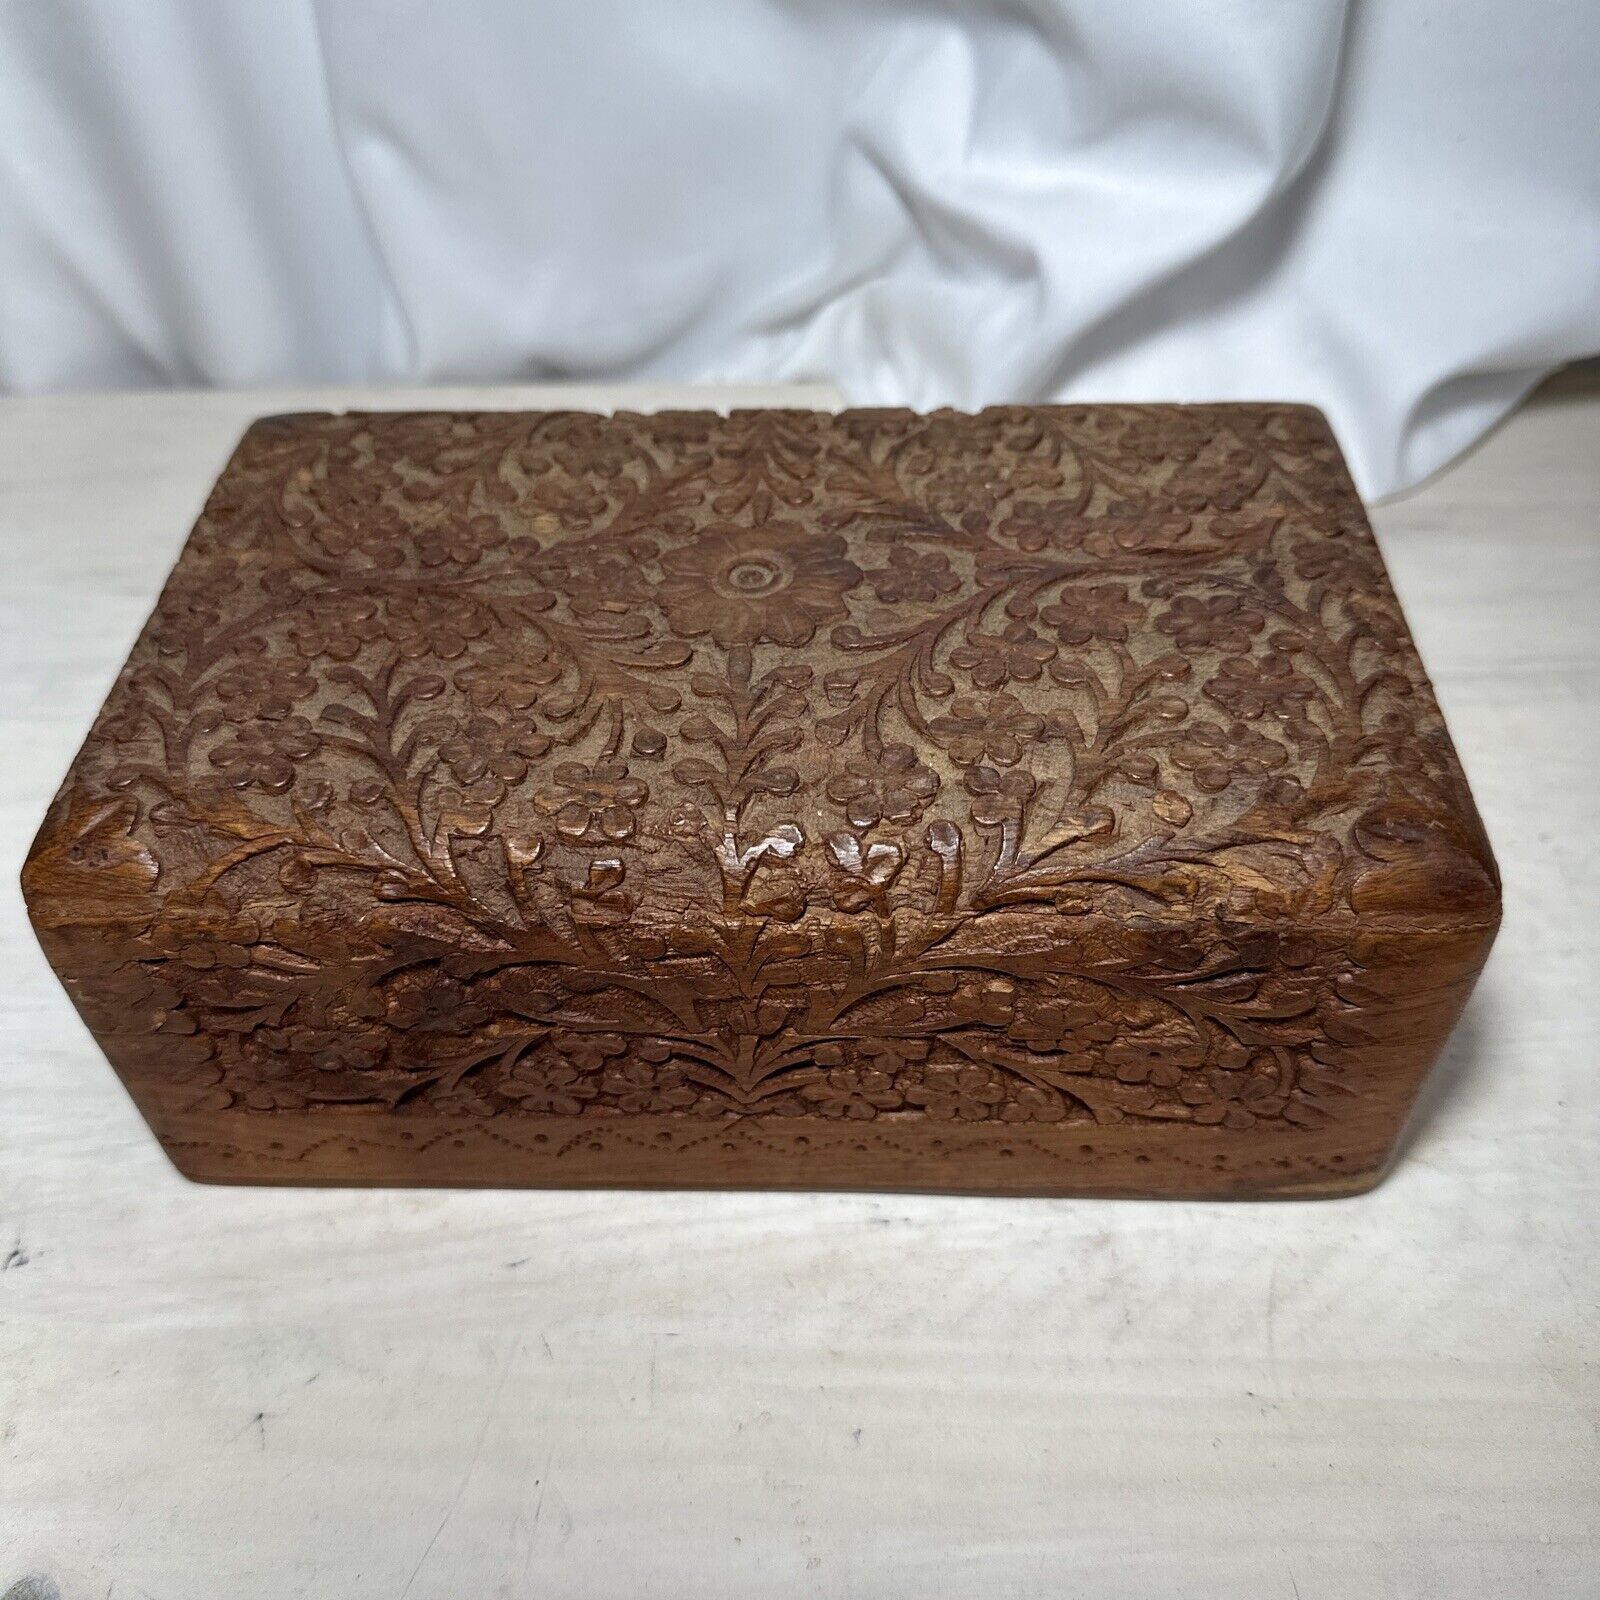 Vintage Hand Carved Floral Wooden Trinket/Jewelry Box 8x5x3”T